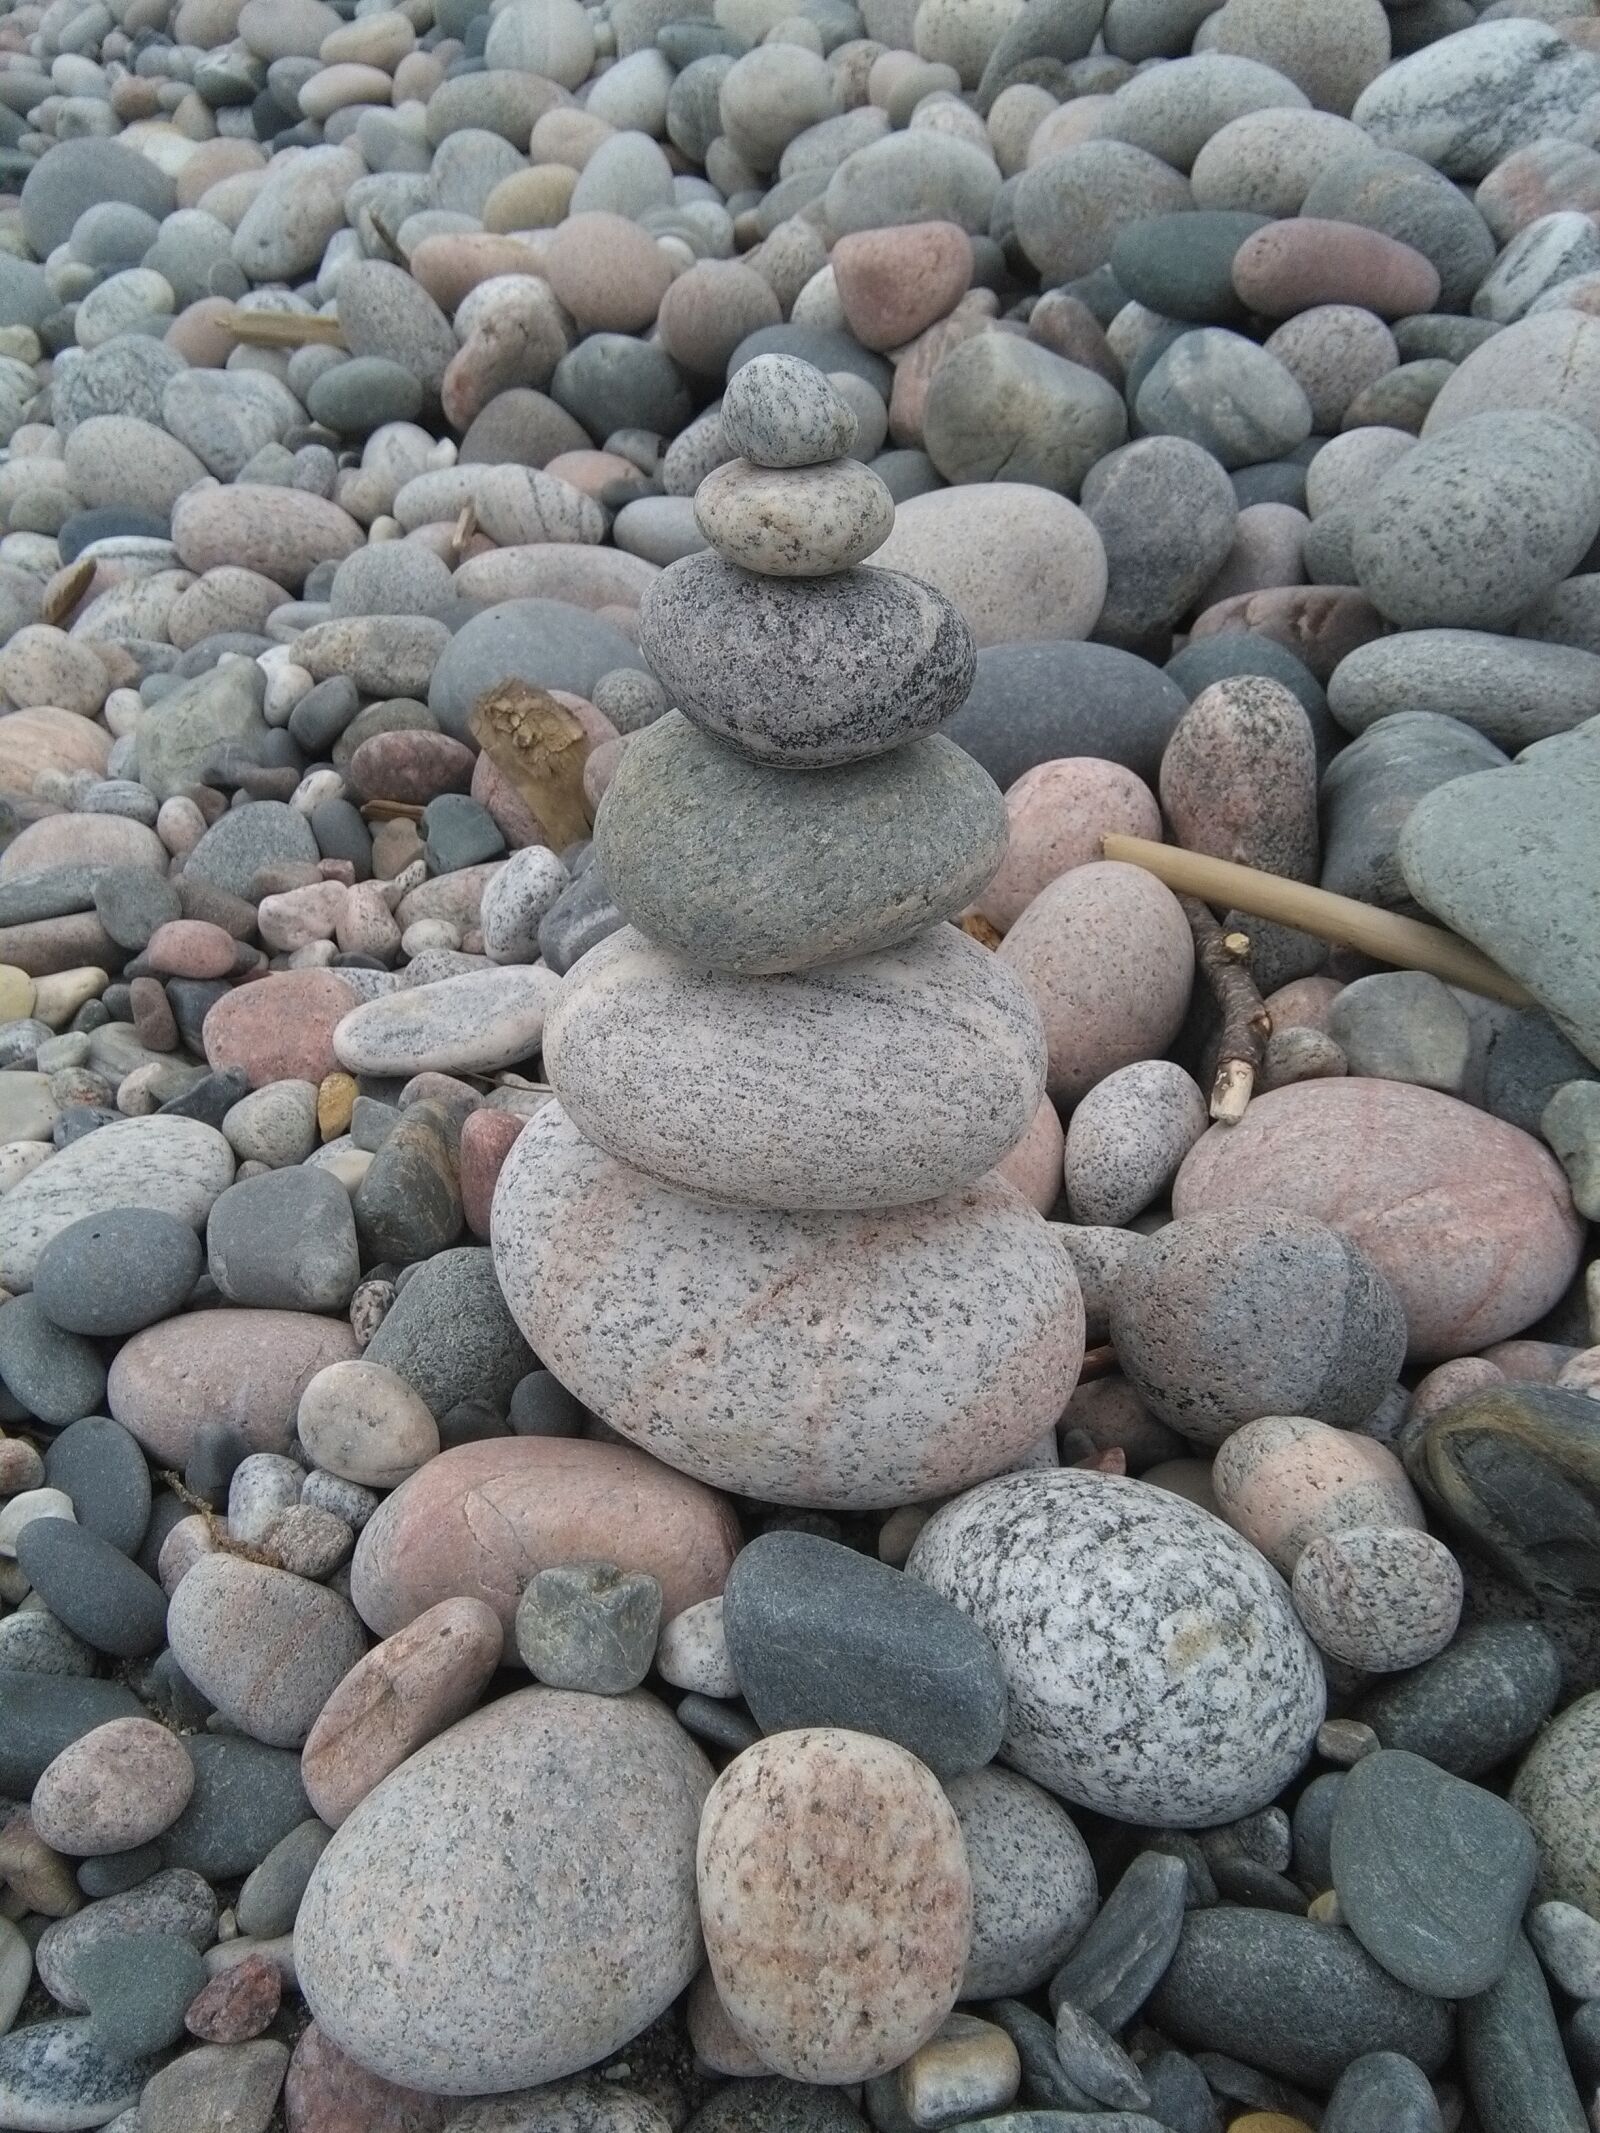 HUAWEI Y6 sample photo. Roller, pebbles, beach photography